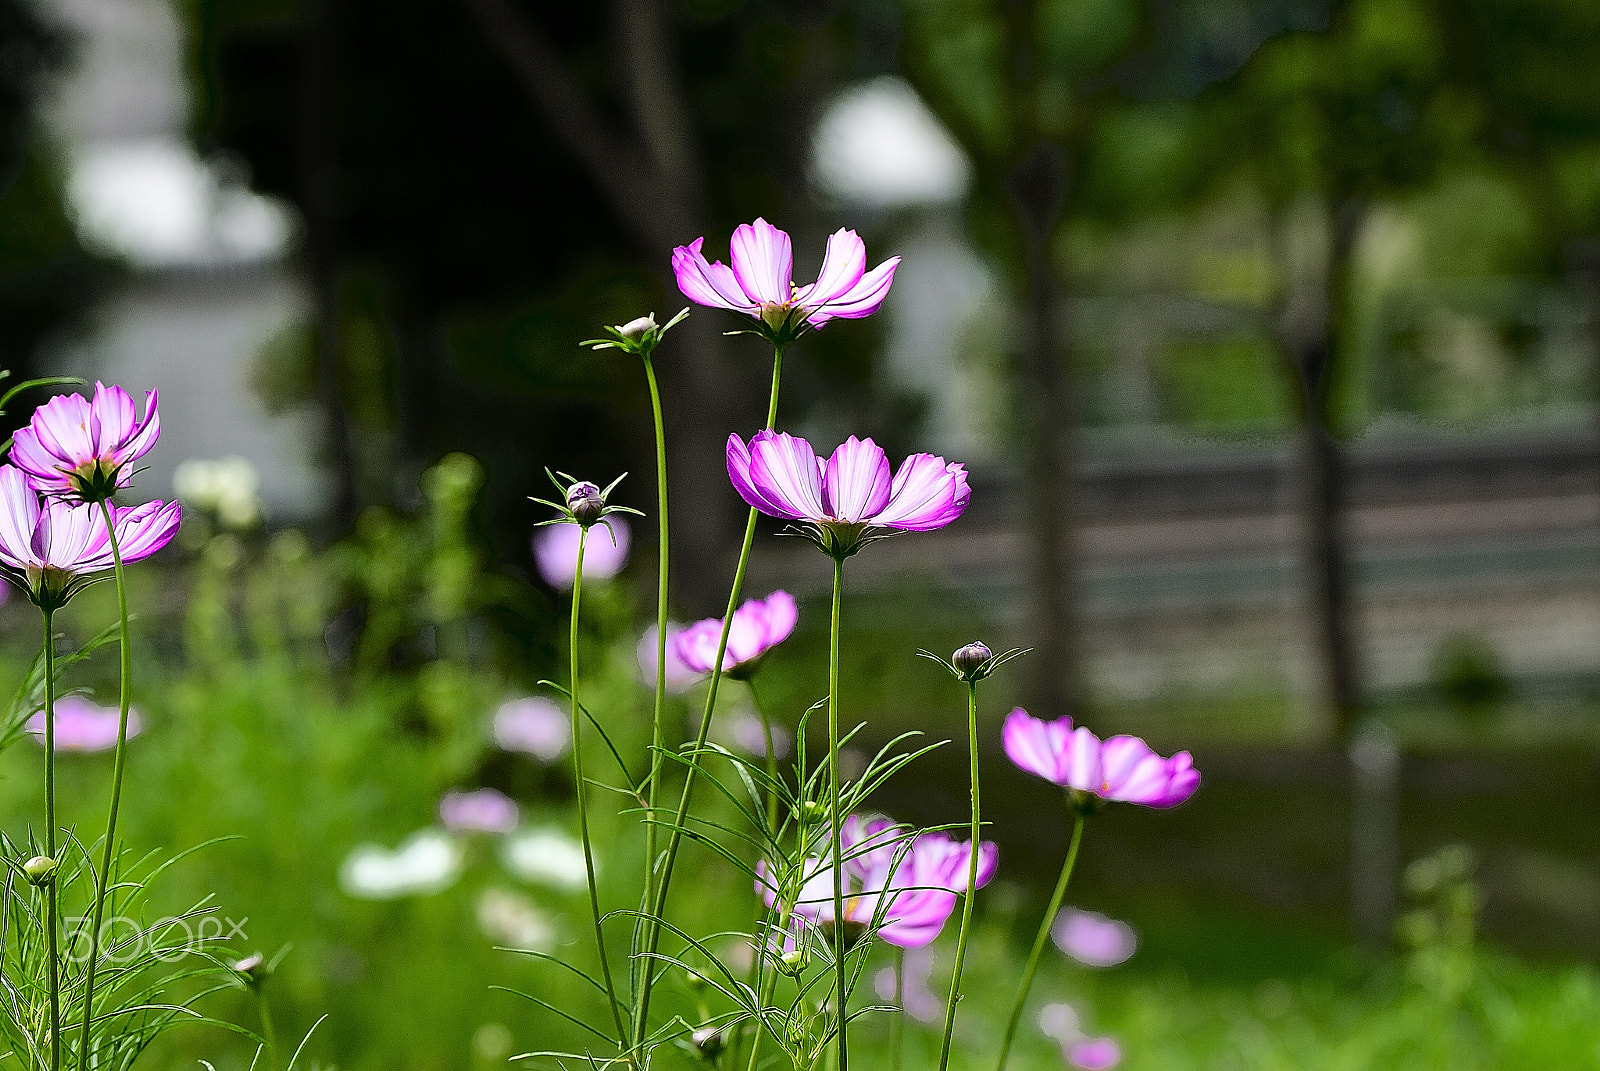 Nikon D200 sample photo. White framed in pale purple cosmos photography